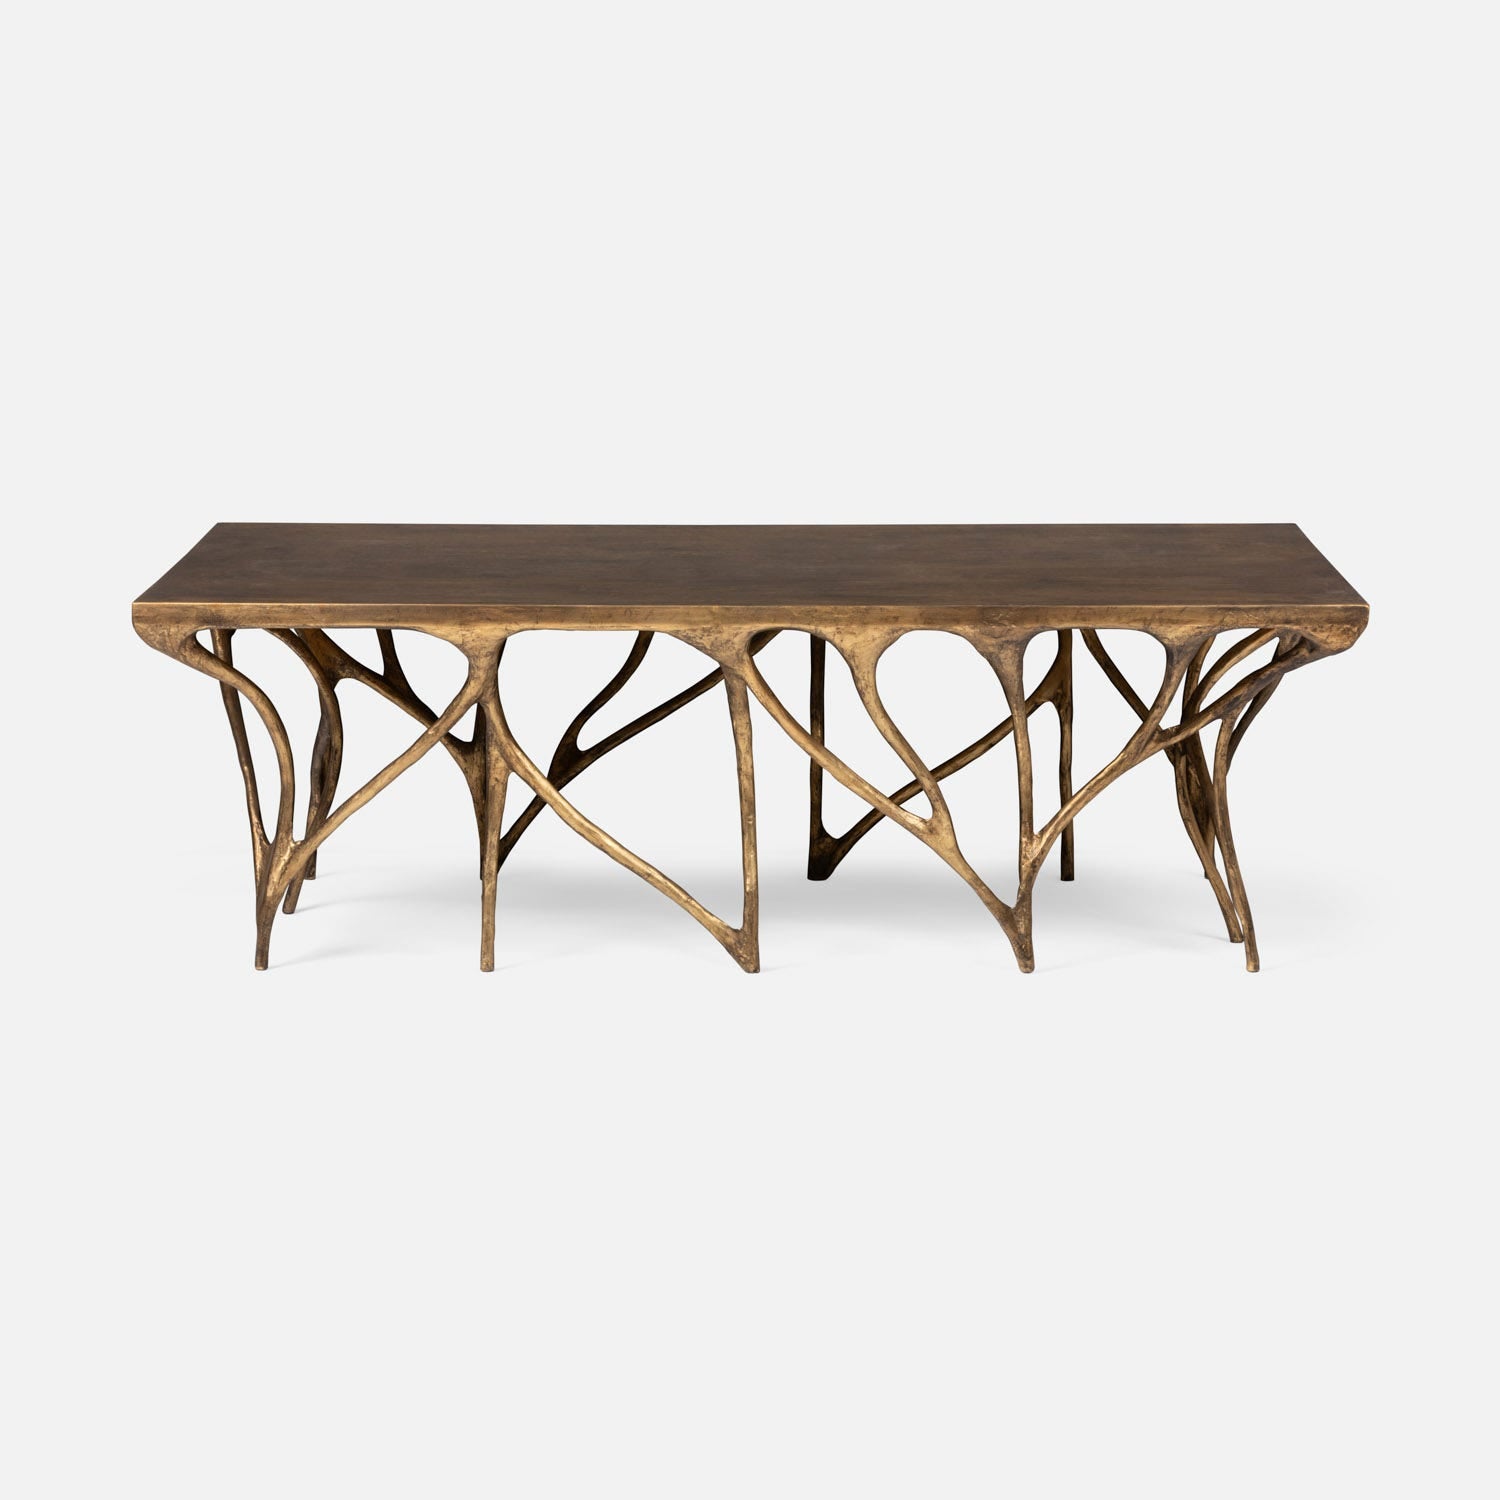 Made Goods Aldrich Antiqued Branch-Shaped Leg Coffee Table